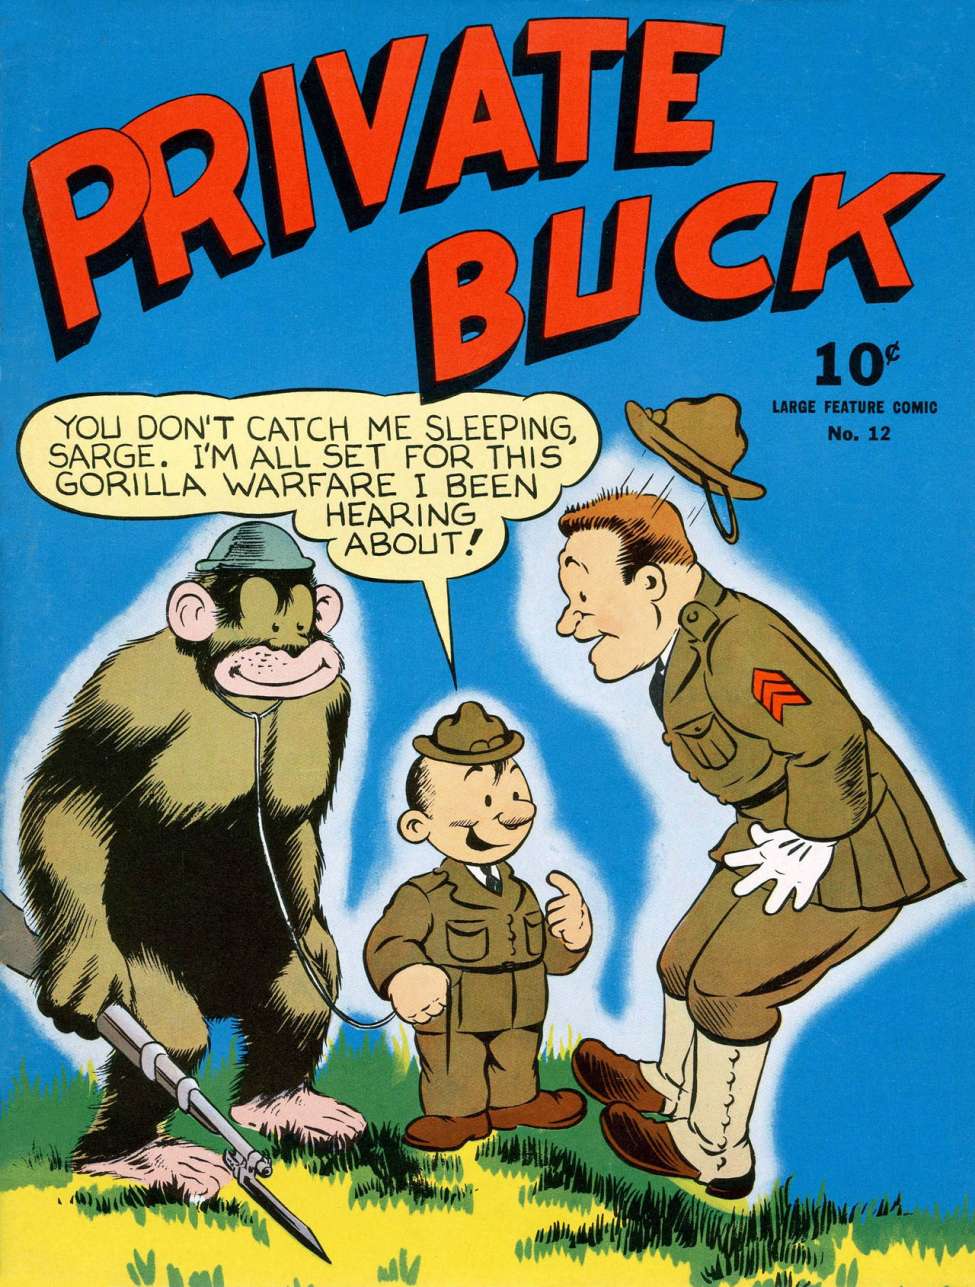 Book Cover For Large Feature Comic v2 12 - Private Buck